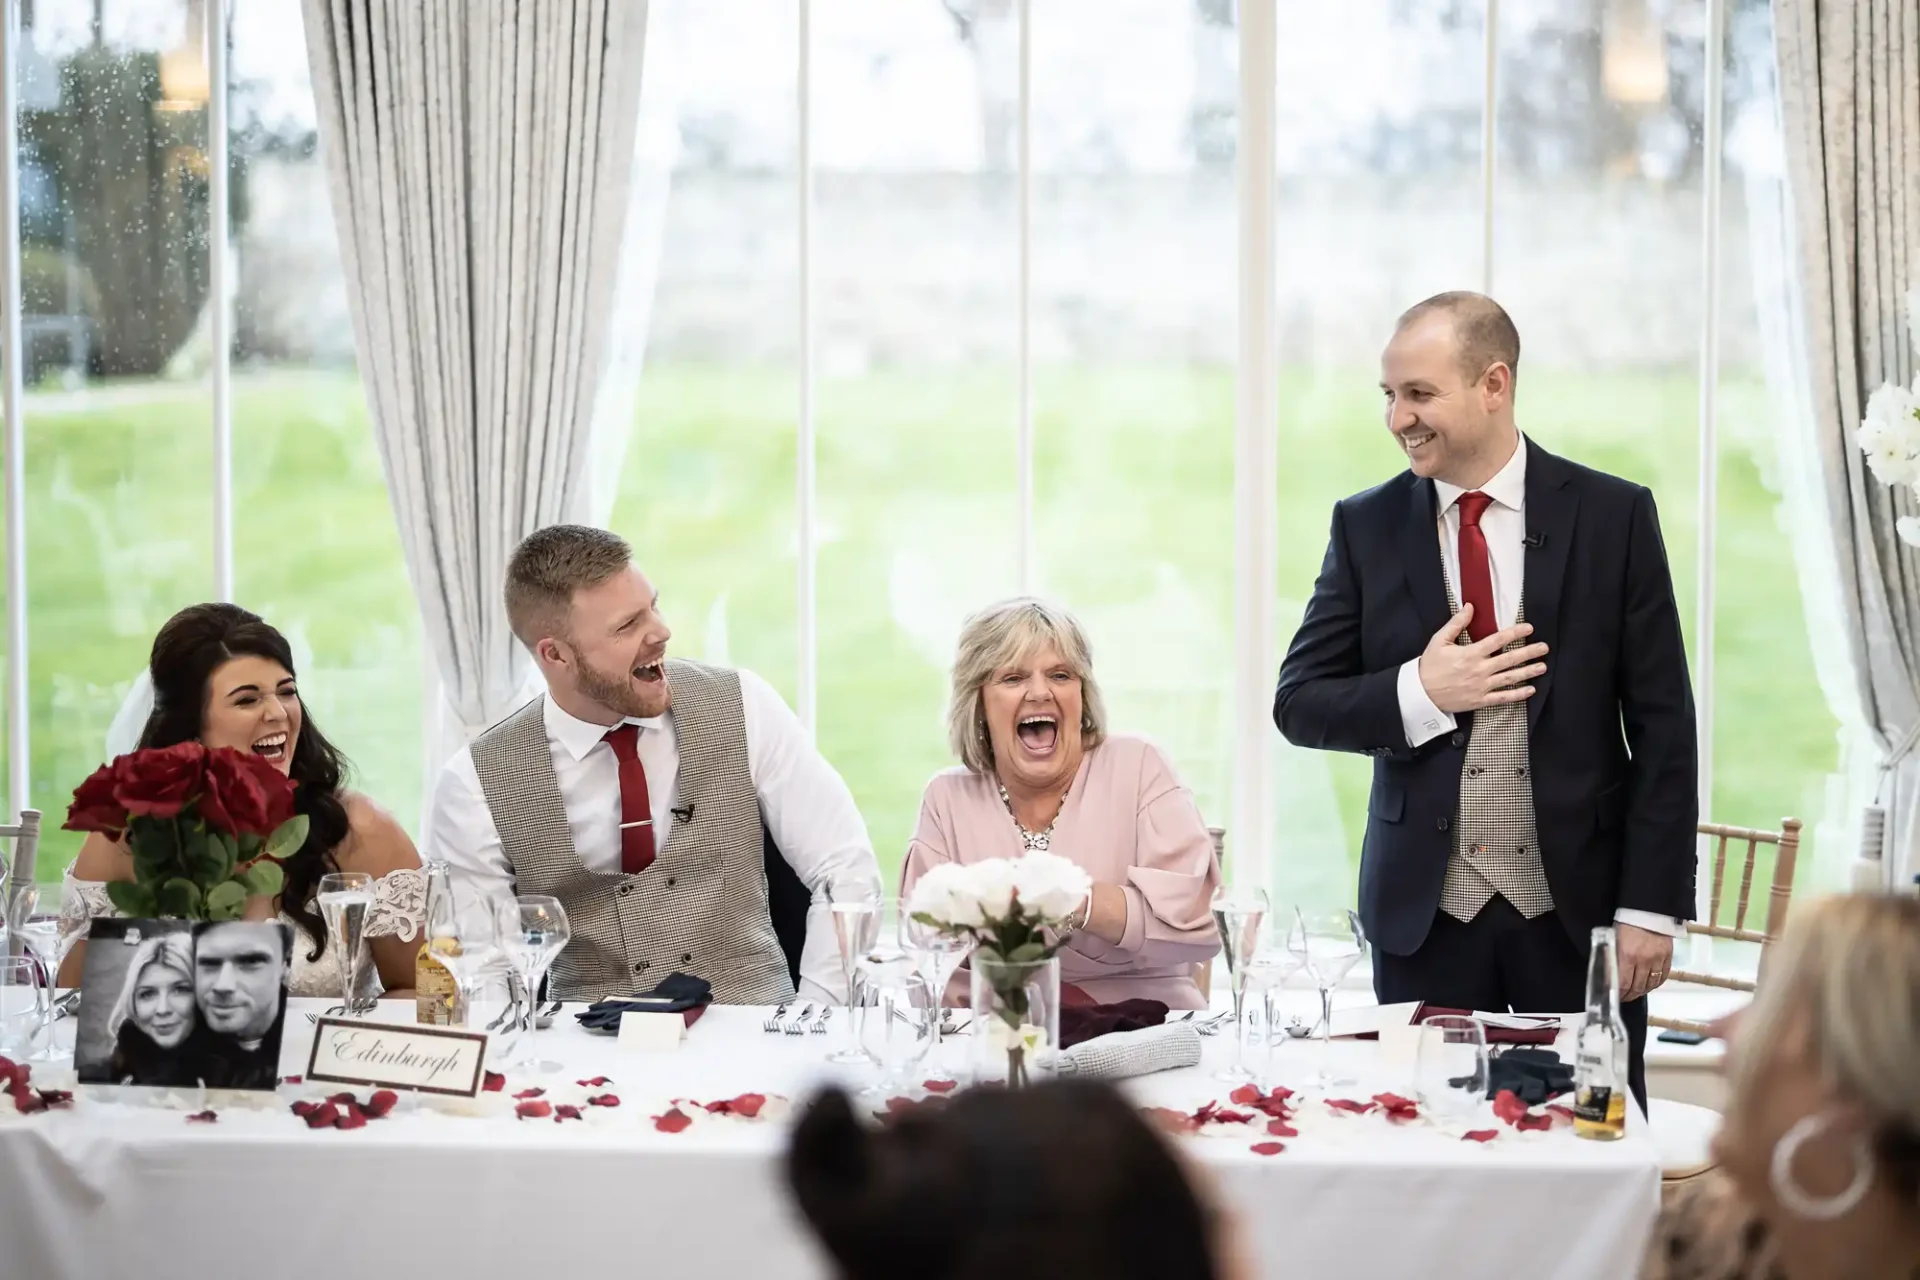 A man in a red tie standing and laughing at a wedding table with three seated guests who are also laughing joyously, surrounded by elegant decor and large windows.